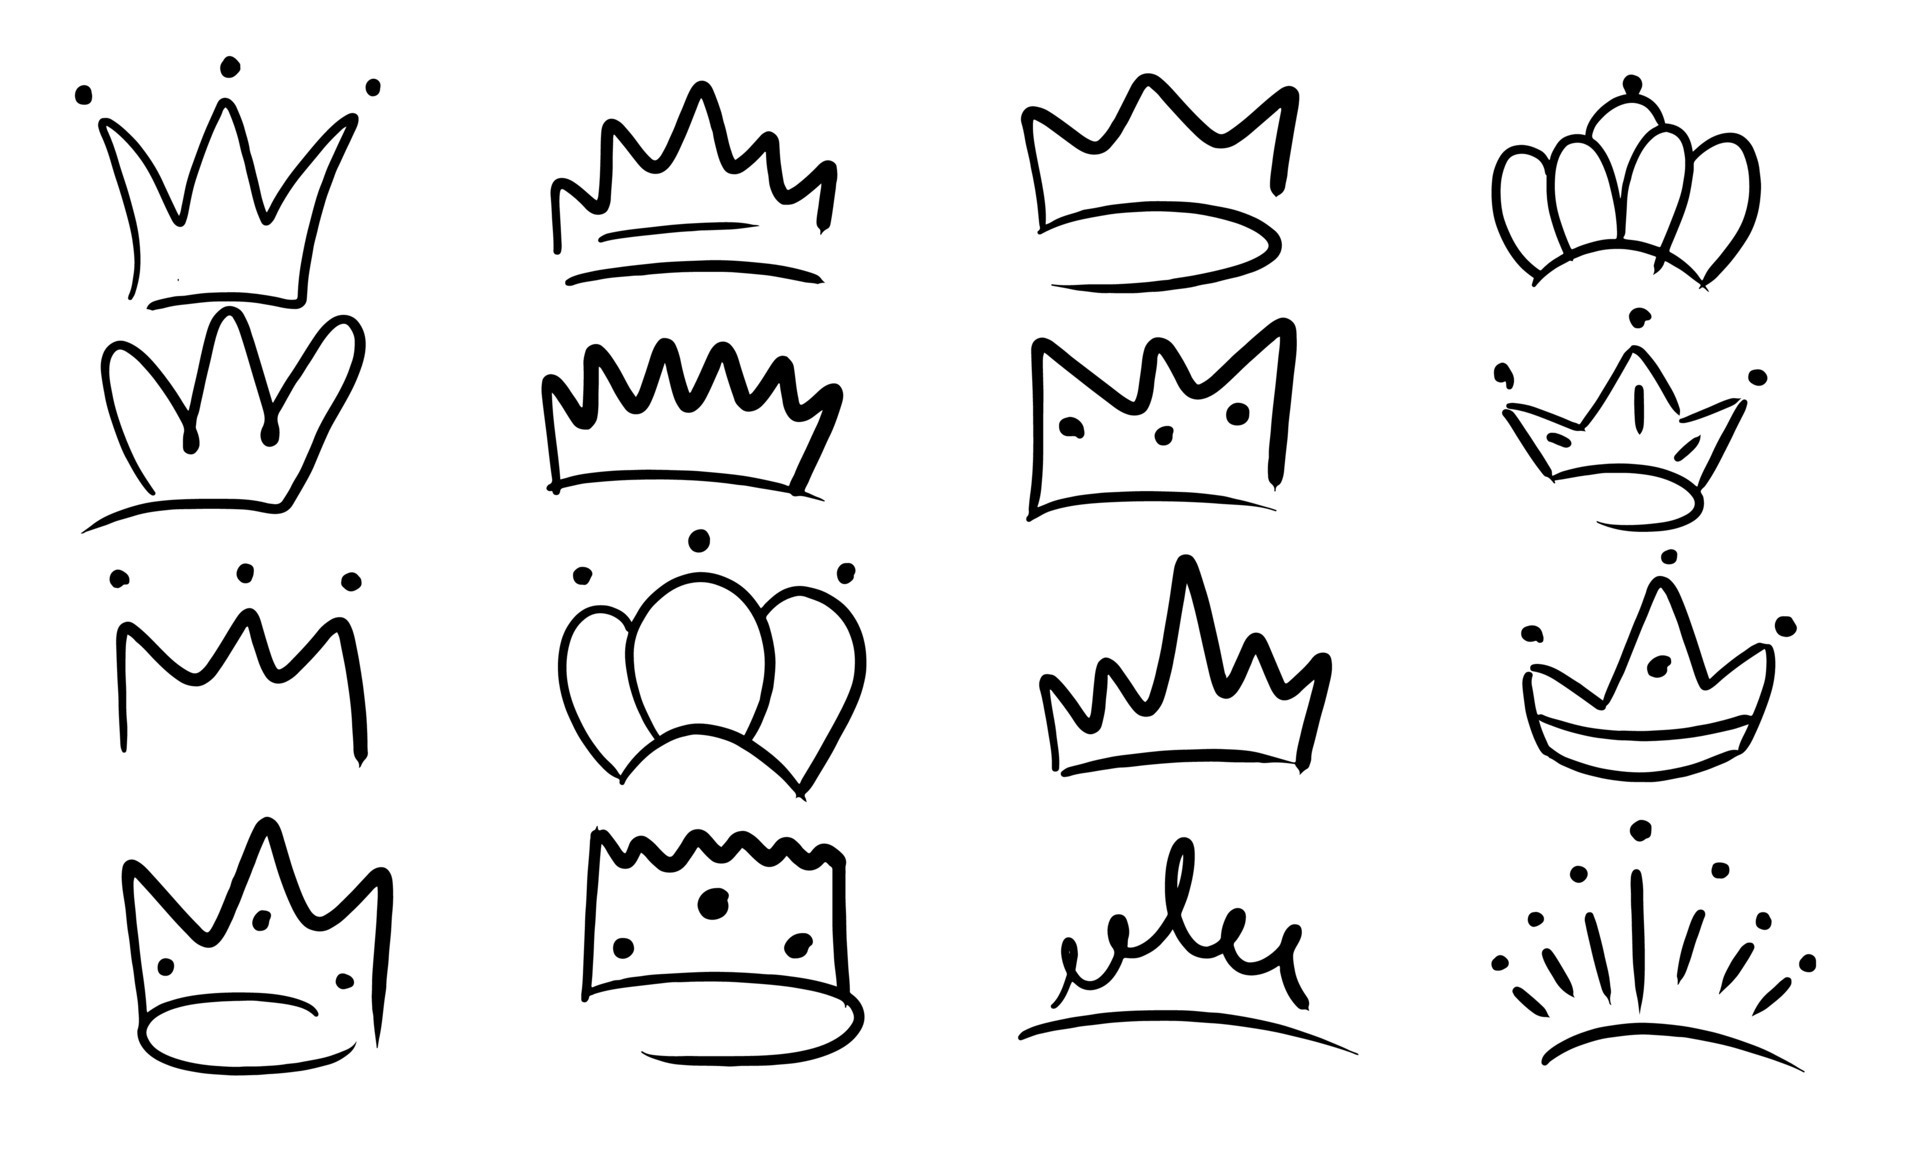 Sketch crowns. Hand drawn king, queen crown and princess tiara